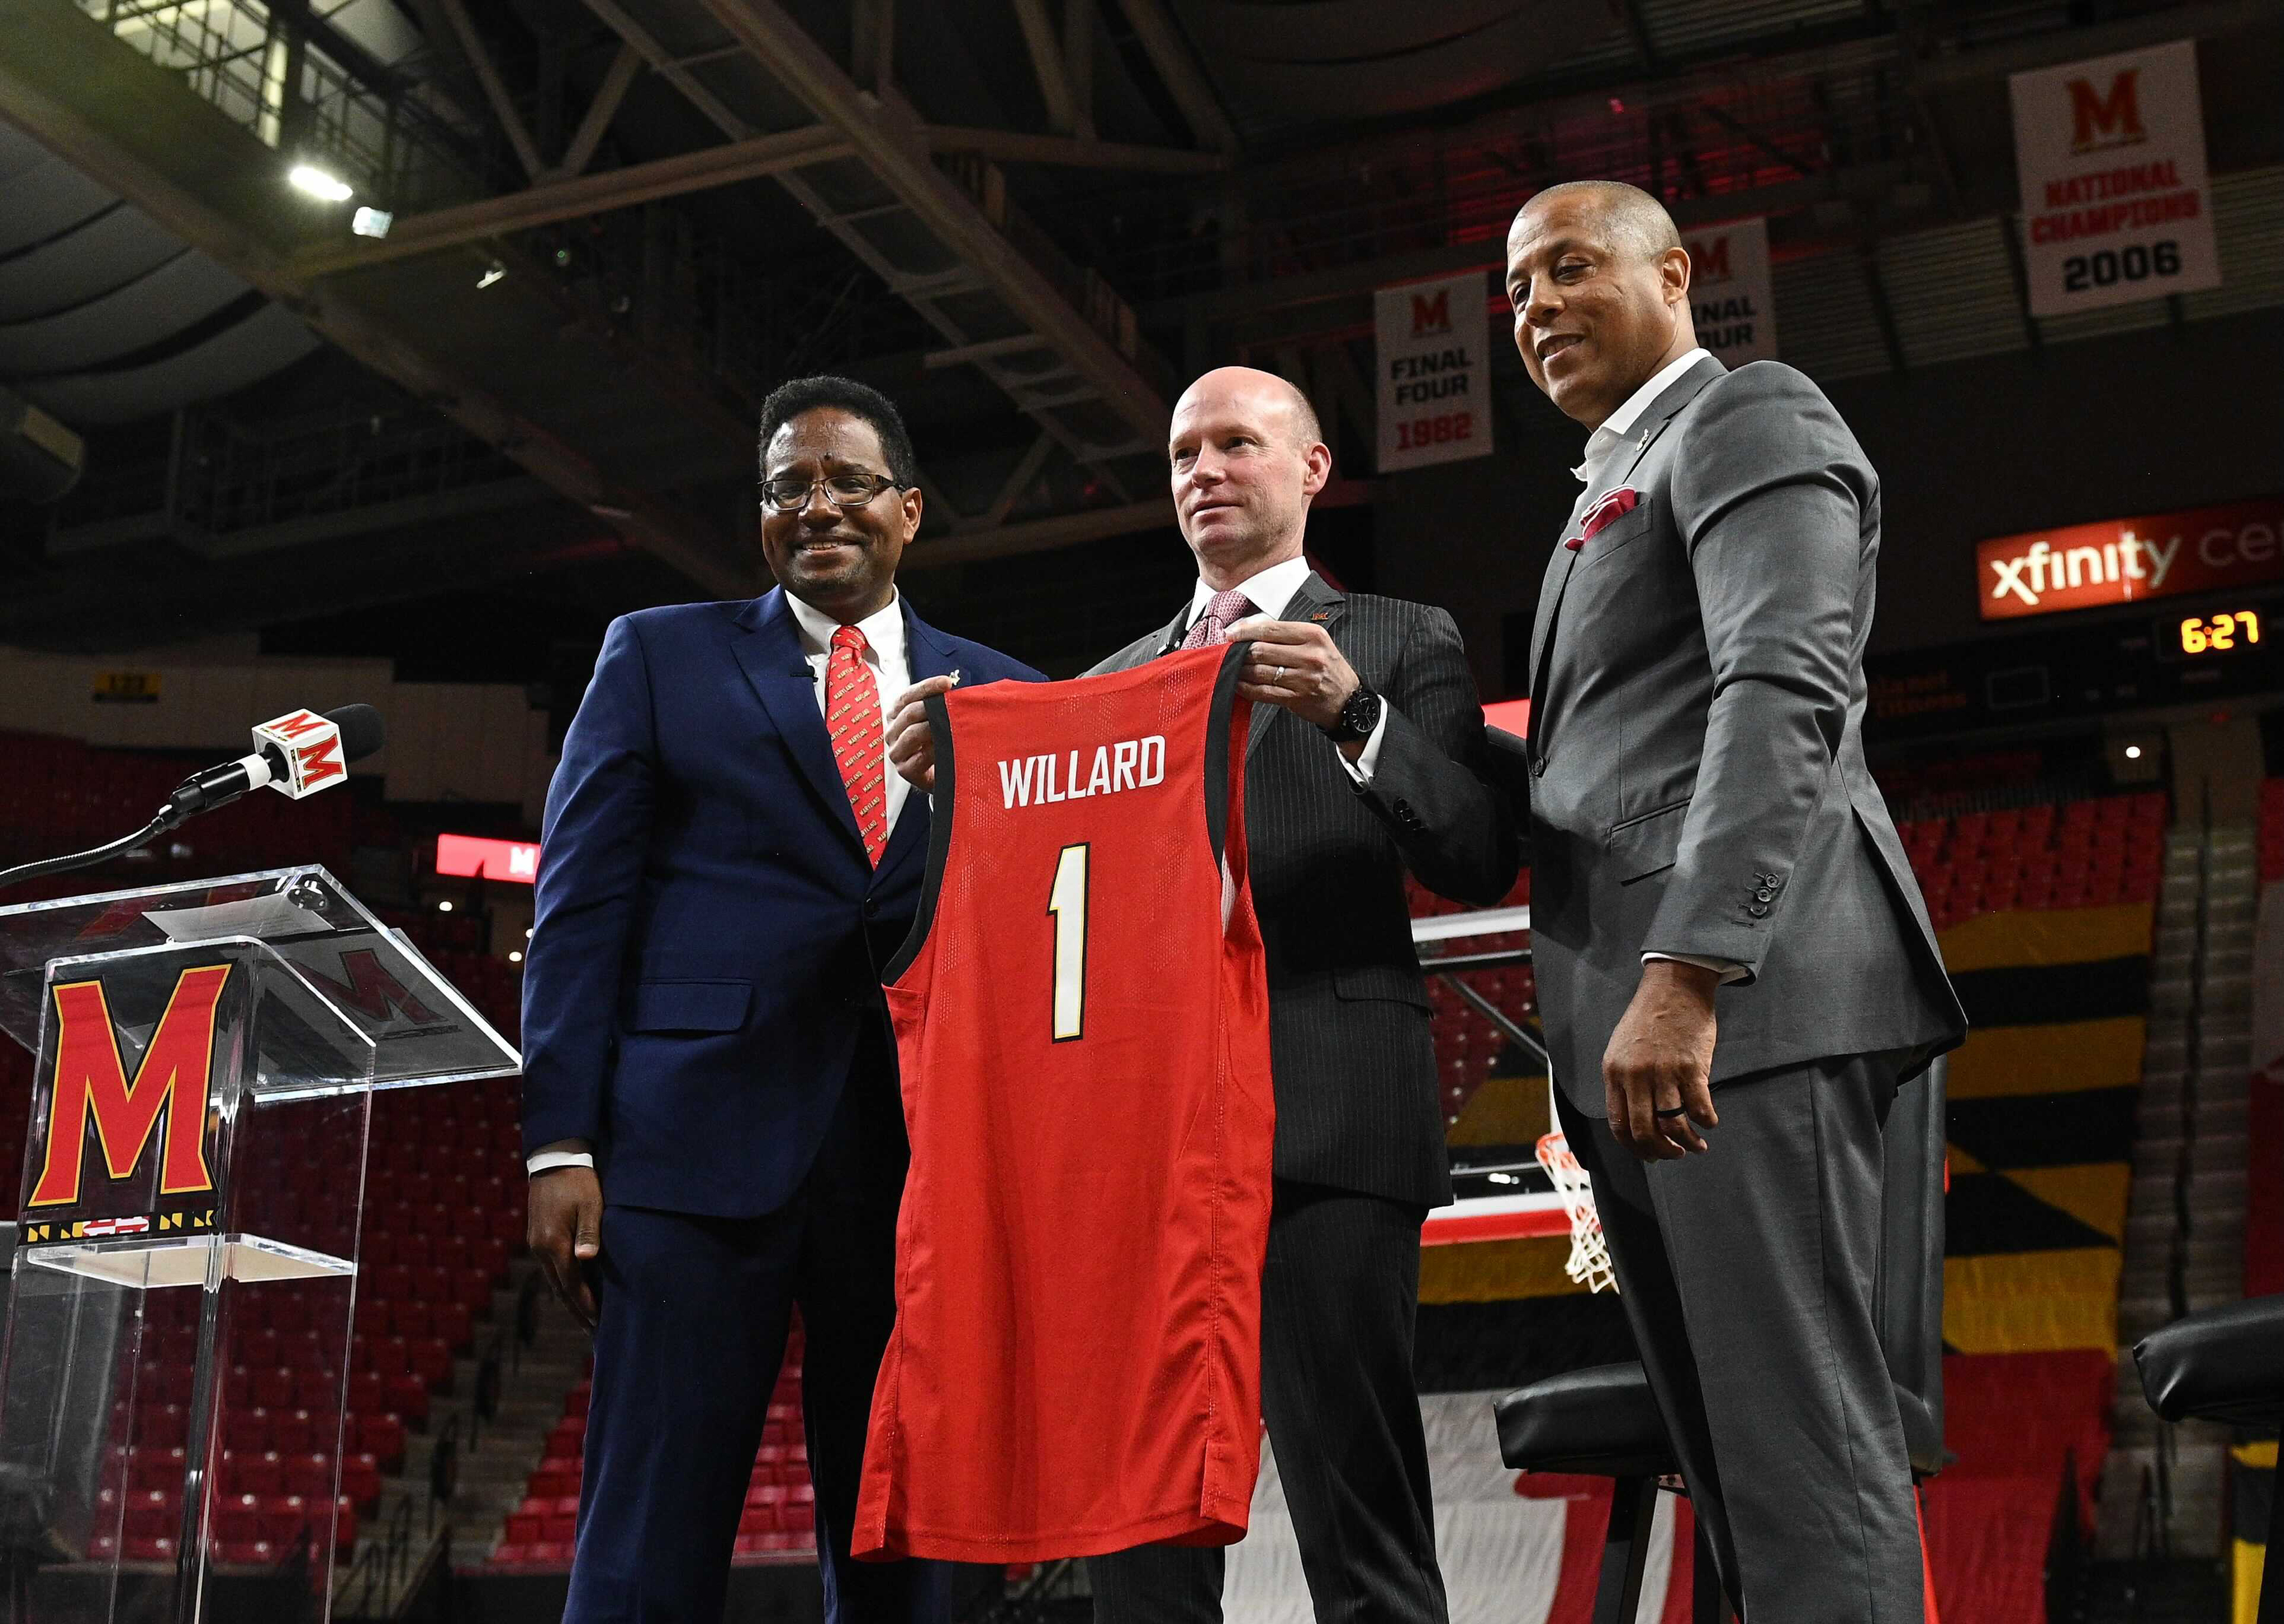 By returning 'swagger' to Maryland men's basketball, Kevin Willard aims to  win over fans longing for success – Baltimore Sun